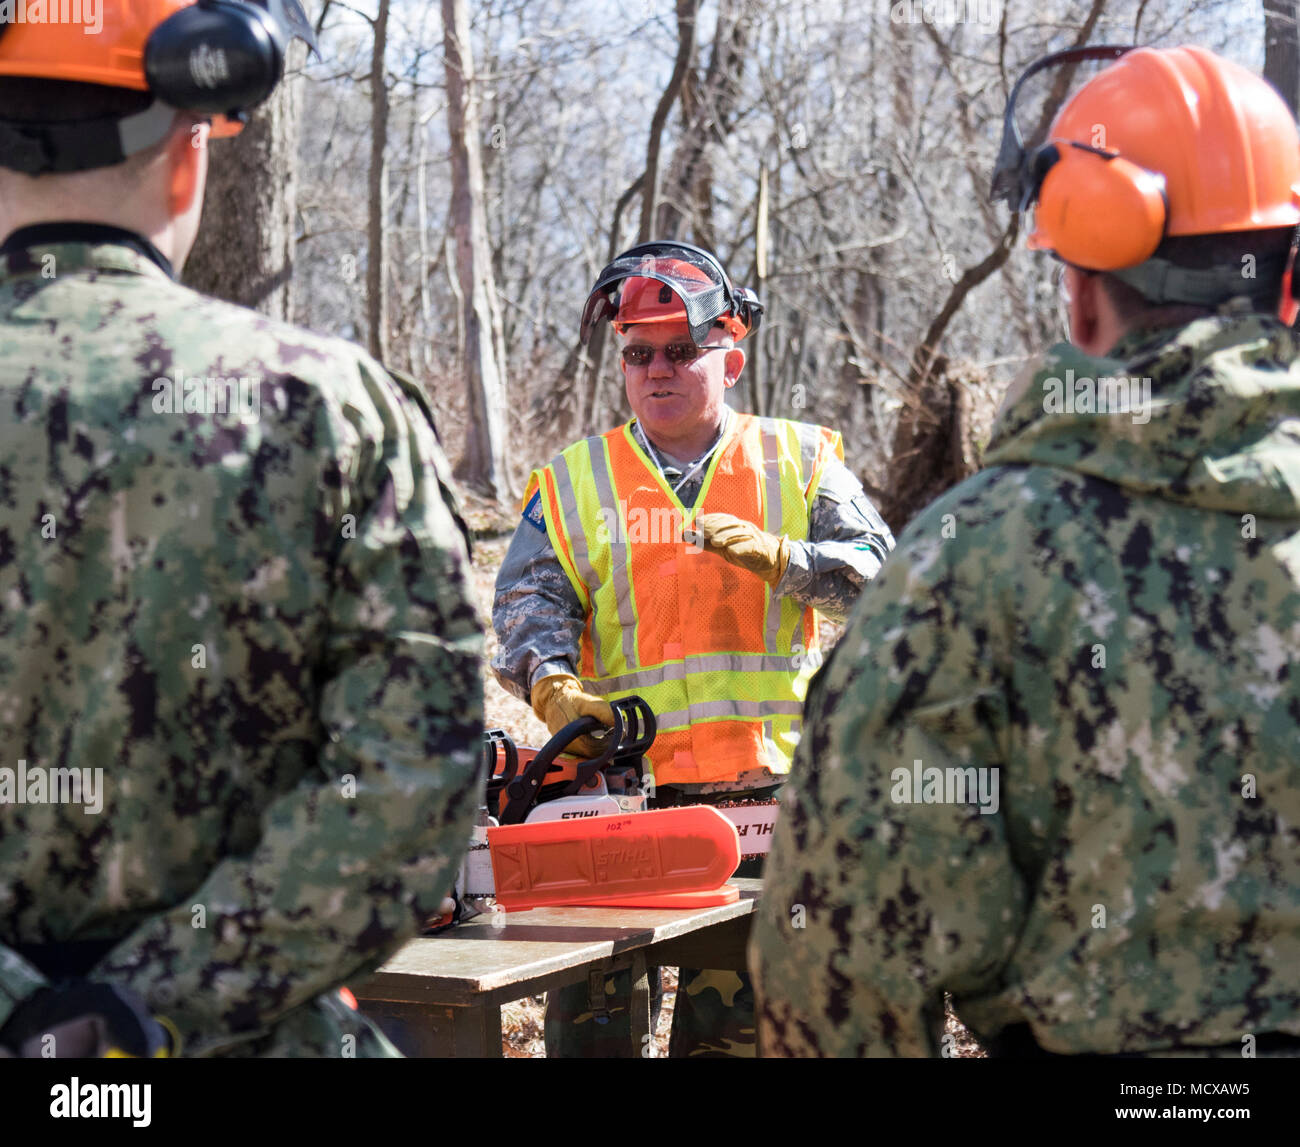 1st Sgt. Robert Rathbun, a member of the New York Guard's 102nd Engineers, delivers a block of instruction on chainsaw operation and safety on Camp Smith Training Site, Cortlandt Manor, N.Y., Mar. 6, 2018 to memberes of the New York Military Forces called in to conduct debris clearance missions following a snowstorm on March 2. The New York Guard is the state's volunteer response force. Two hundred members of the New York Army and Air National Guard, and New York Naval Militia,  and N.Y. Guard have been activated following last Friday’s nor’easter to local emergency services with debris cleara Stock Photo